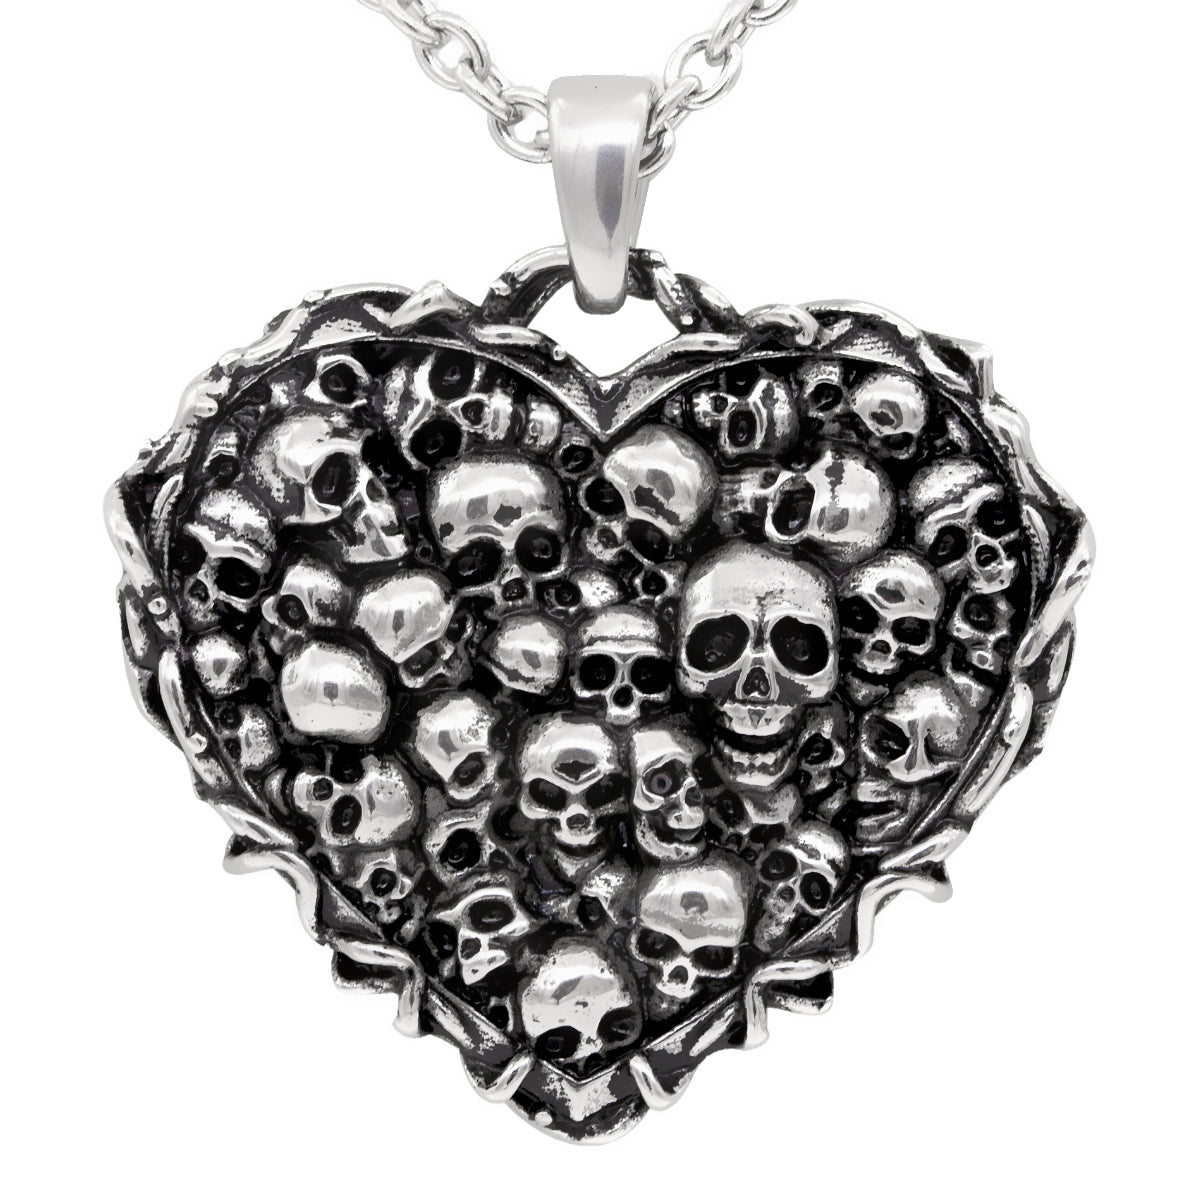 Captivated Souls Heart Pendant Necklace - Stainless Steel Jewelry Accessory Bijou Her